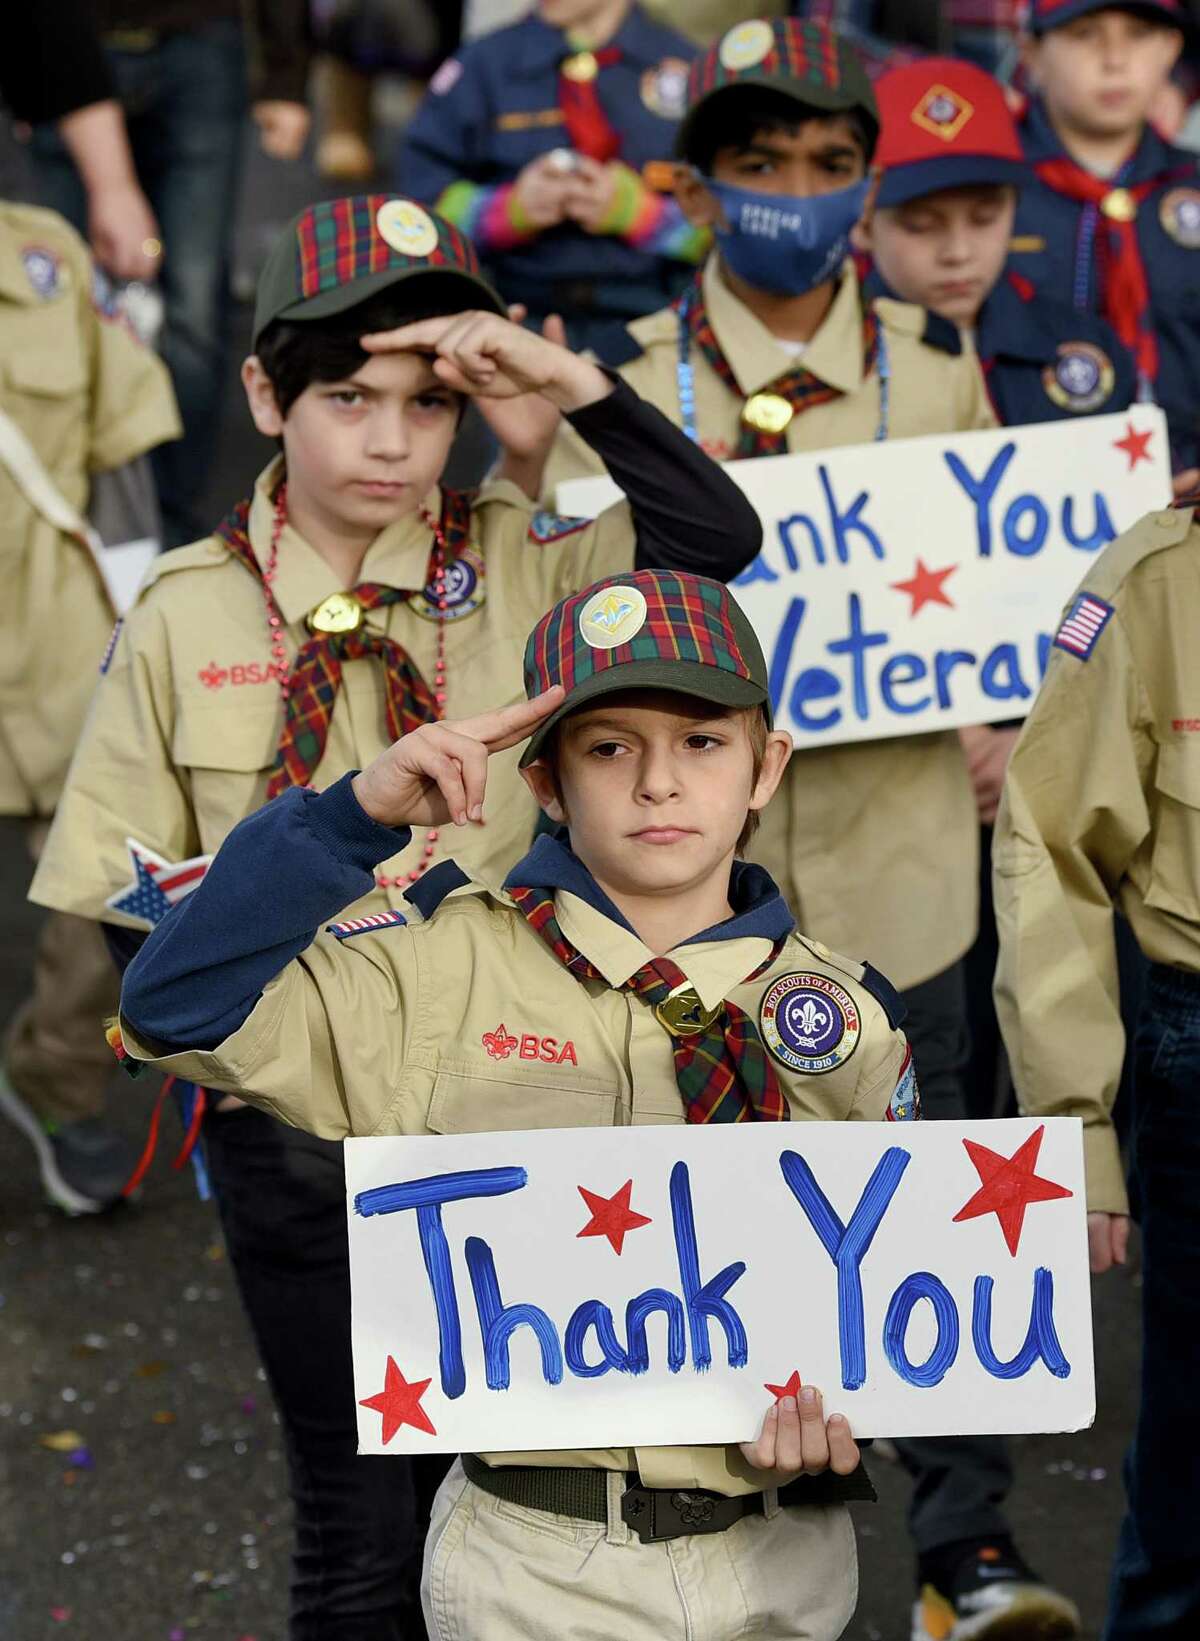 Holding signs to thank veterans, Joseph Grailich, 10, left, and Marco Antonucci, 9, center, march with other members of Milford’s Cub Scout Pack 7 in the annual Veterans Day parade Sunday, Nov. 7, 2021.